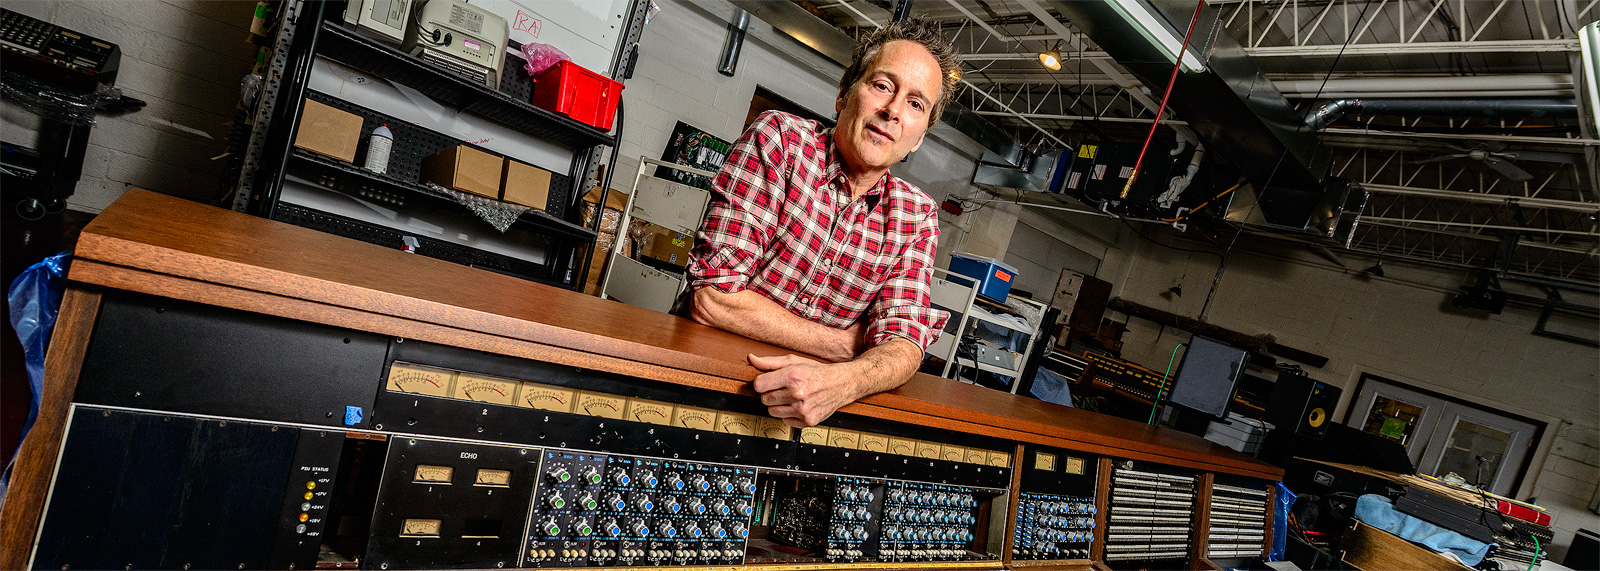 Mike Nehra, co-owner of Vintage King Audio in Ferndale